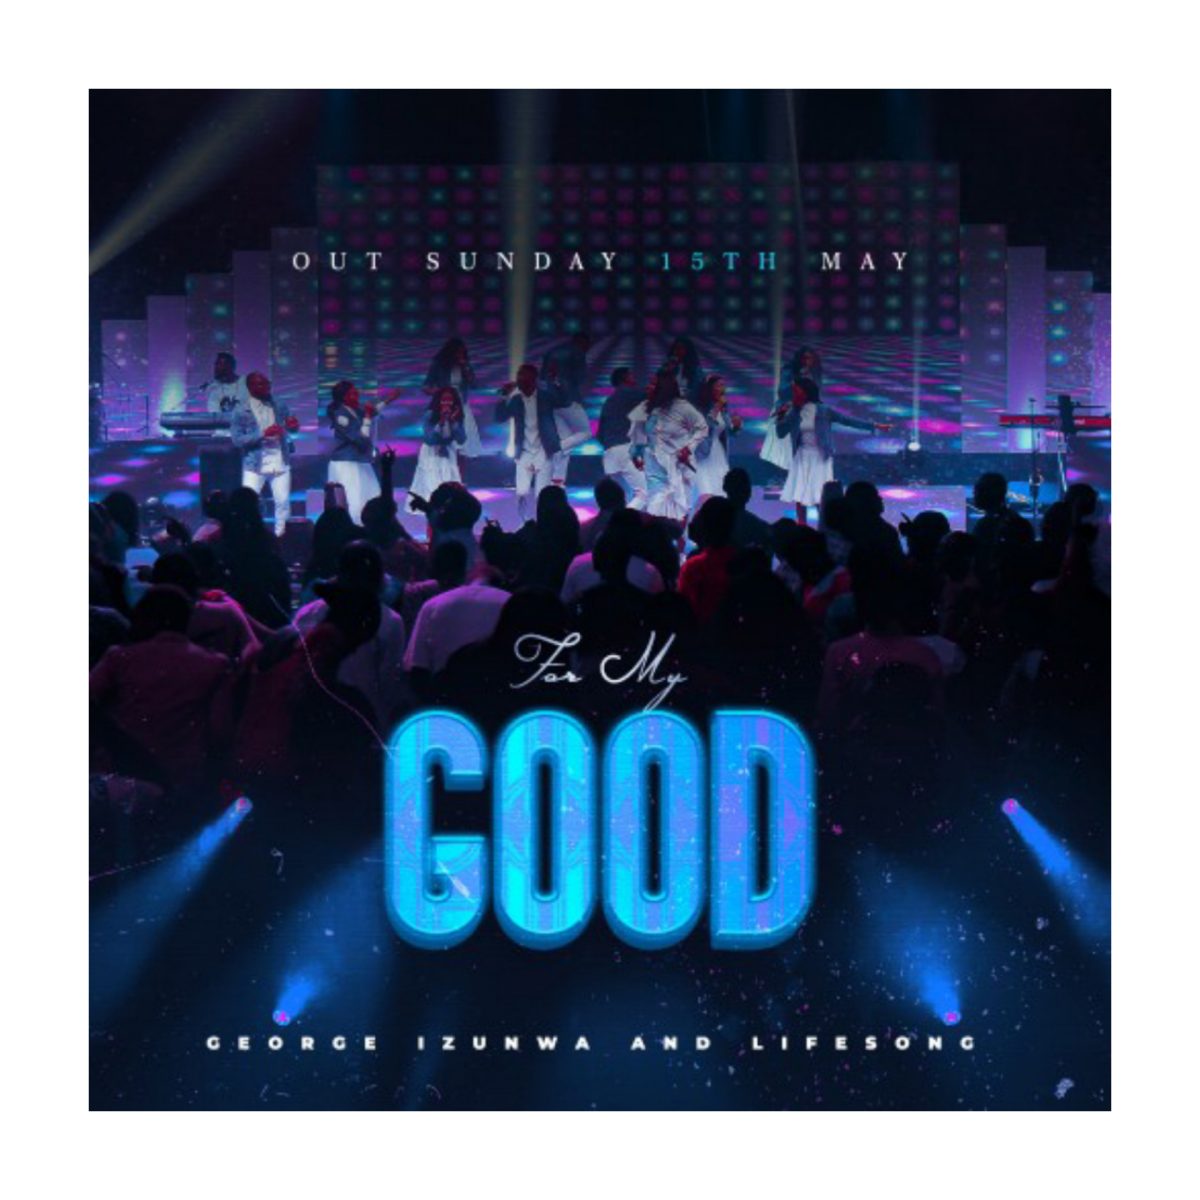 For My Good By Pastor George Izunwa